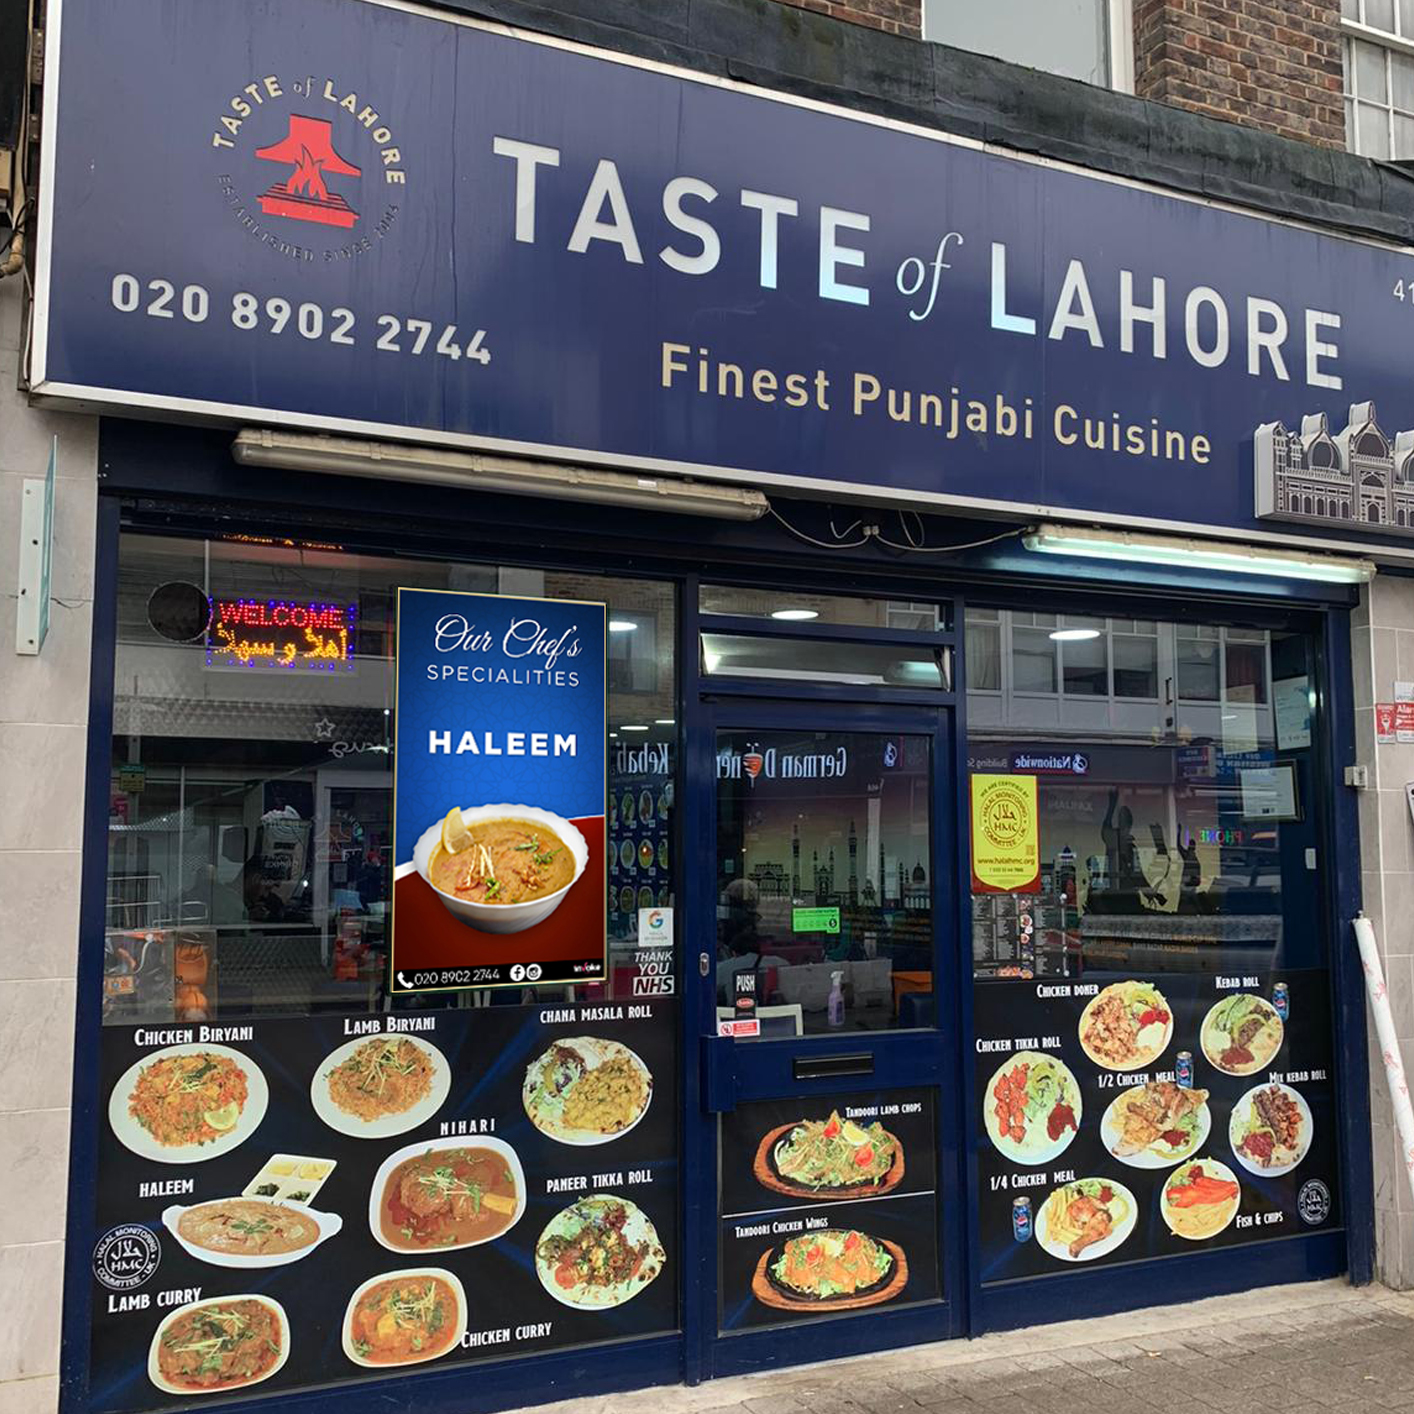 taste of lahore punjabi takeaway using a shop window screen to advertise their chef specialties